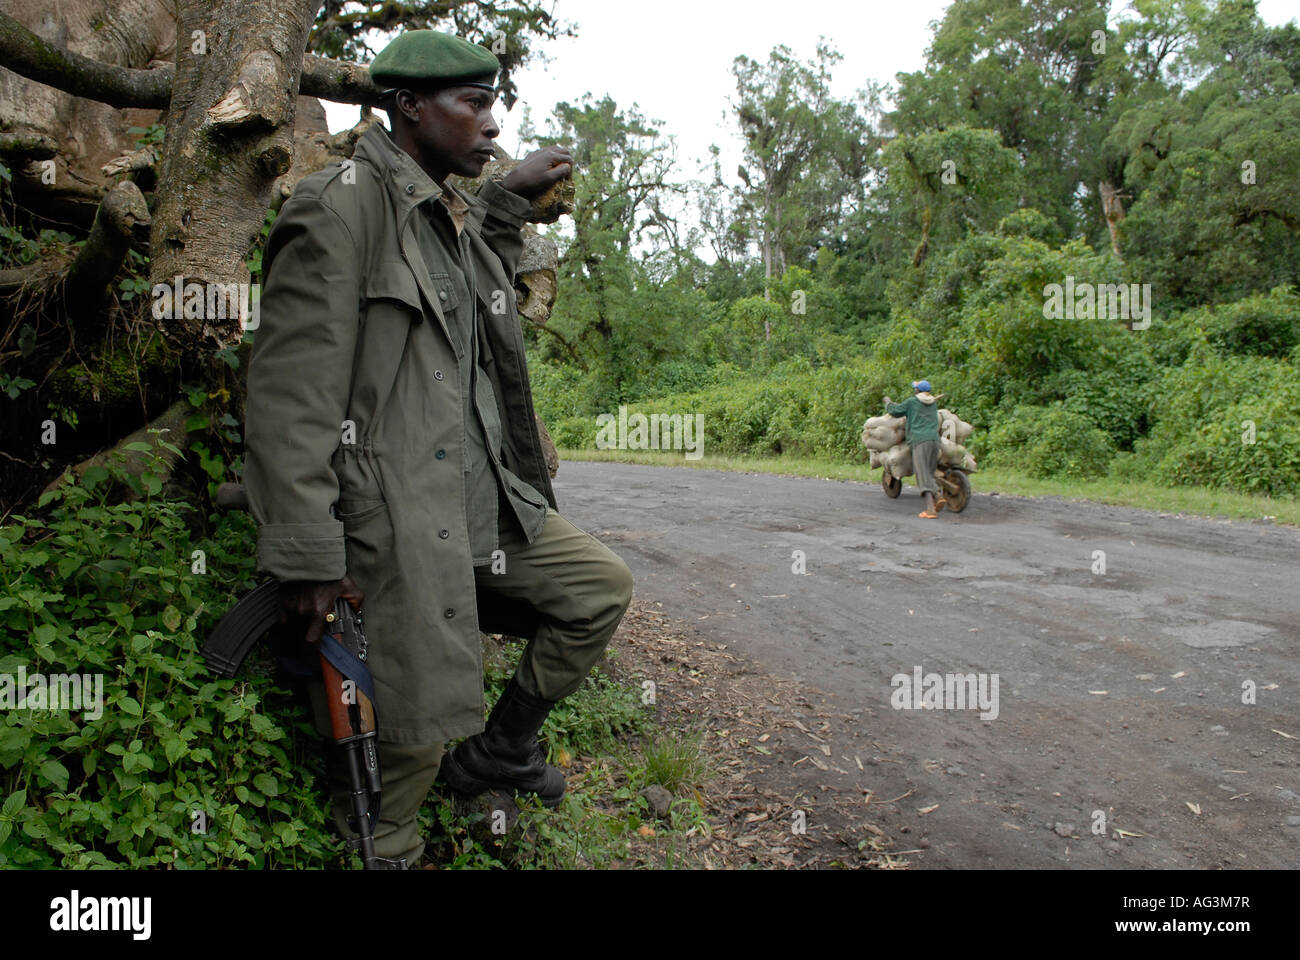 A FARDC Congolese government soldier stands guard with a Kalashnikov AK-47 rifle in a rural area in North Kivu province in DR Congo Africa Stock Photo